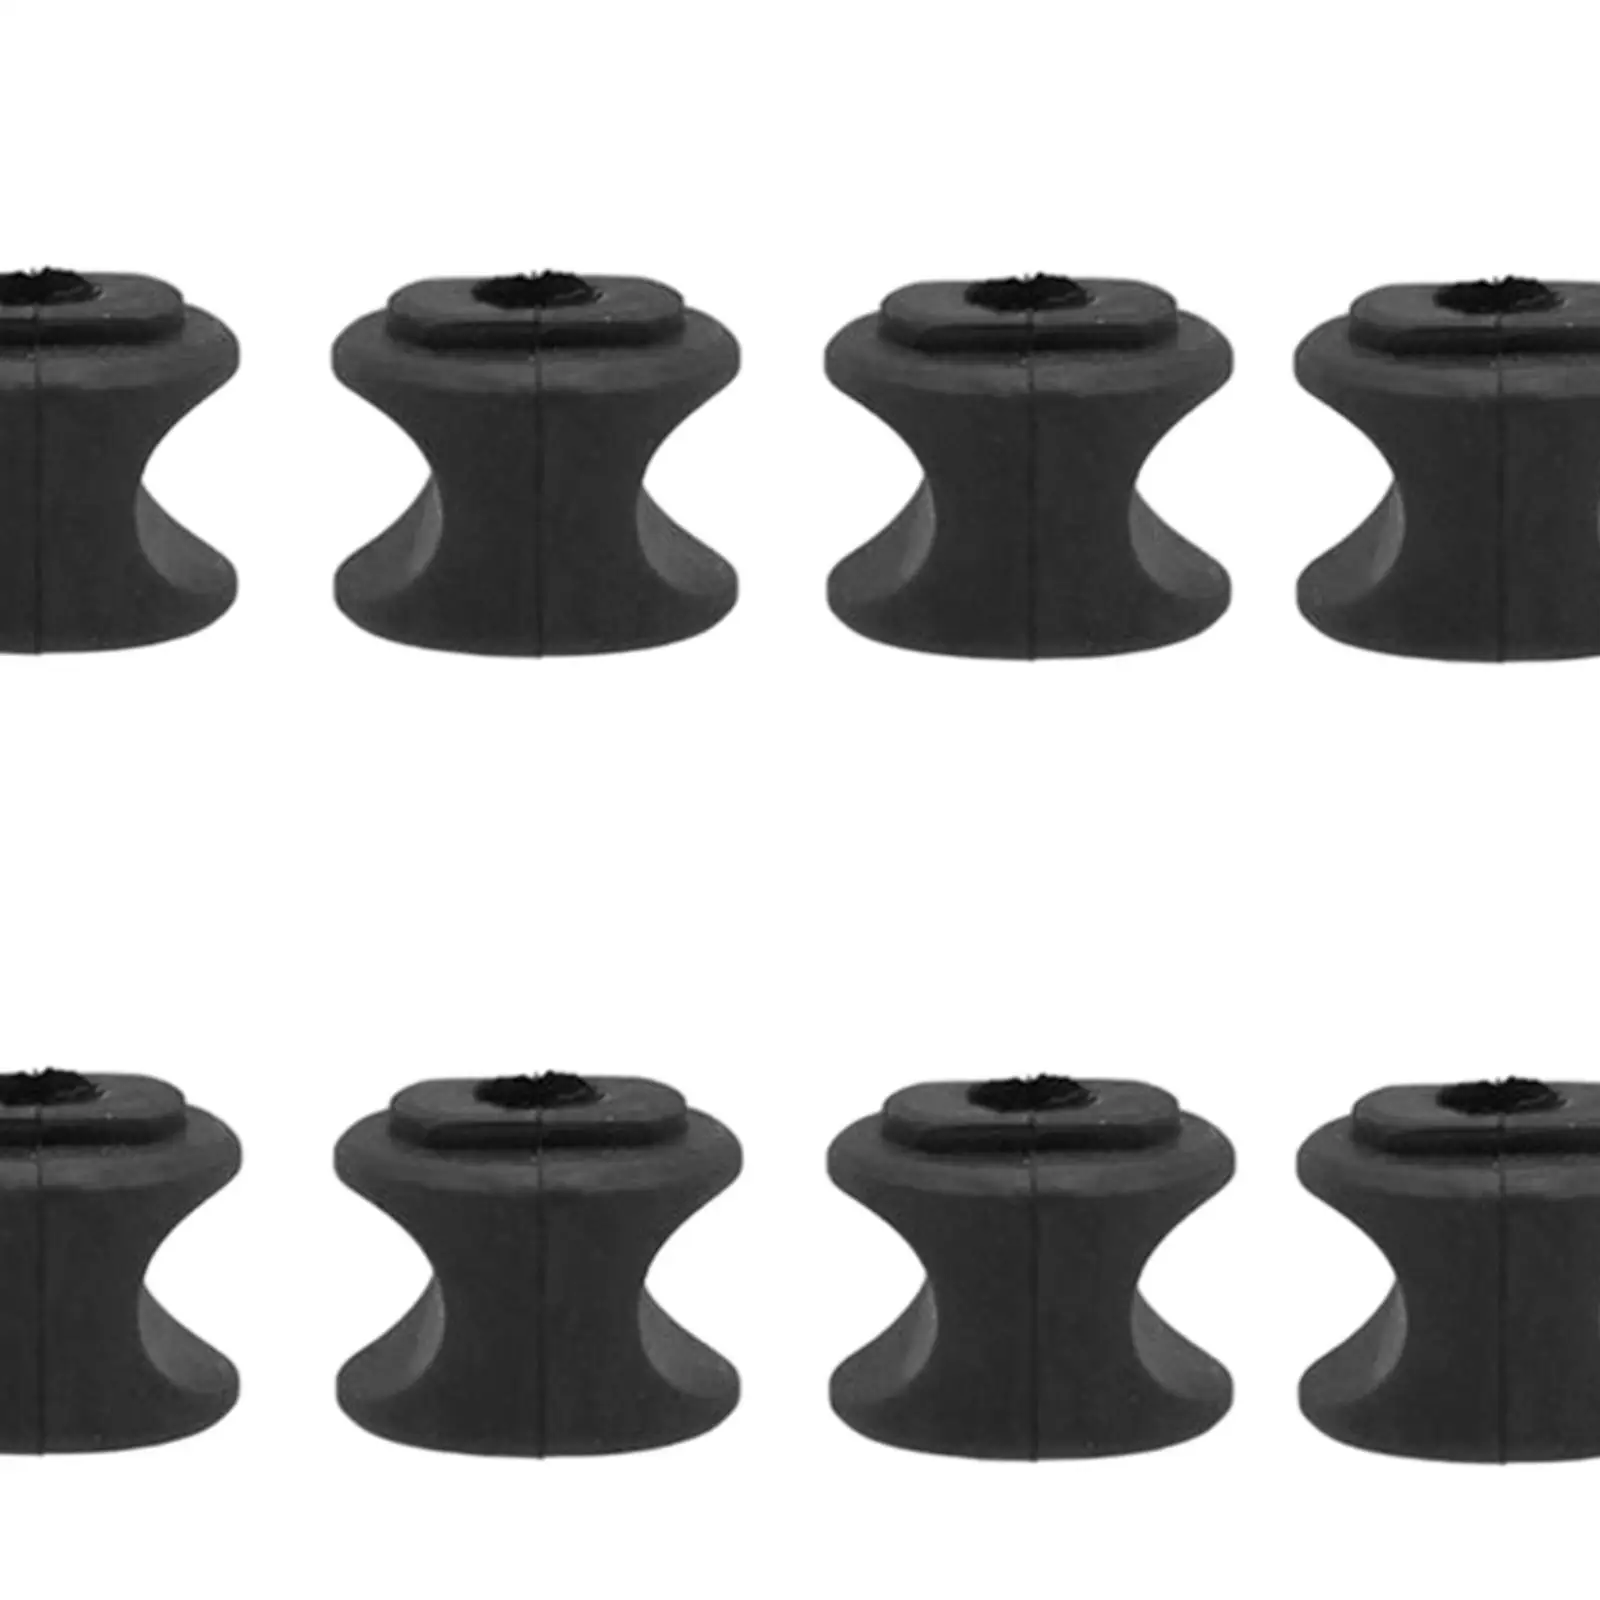 8Pcs Rear Stabilizer Support Bushing Fit for Benz E Class W212 10-12 Auto Parts